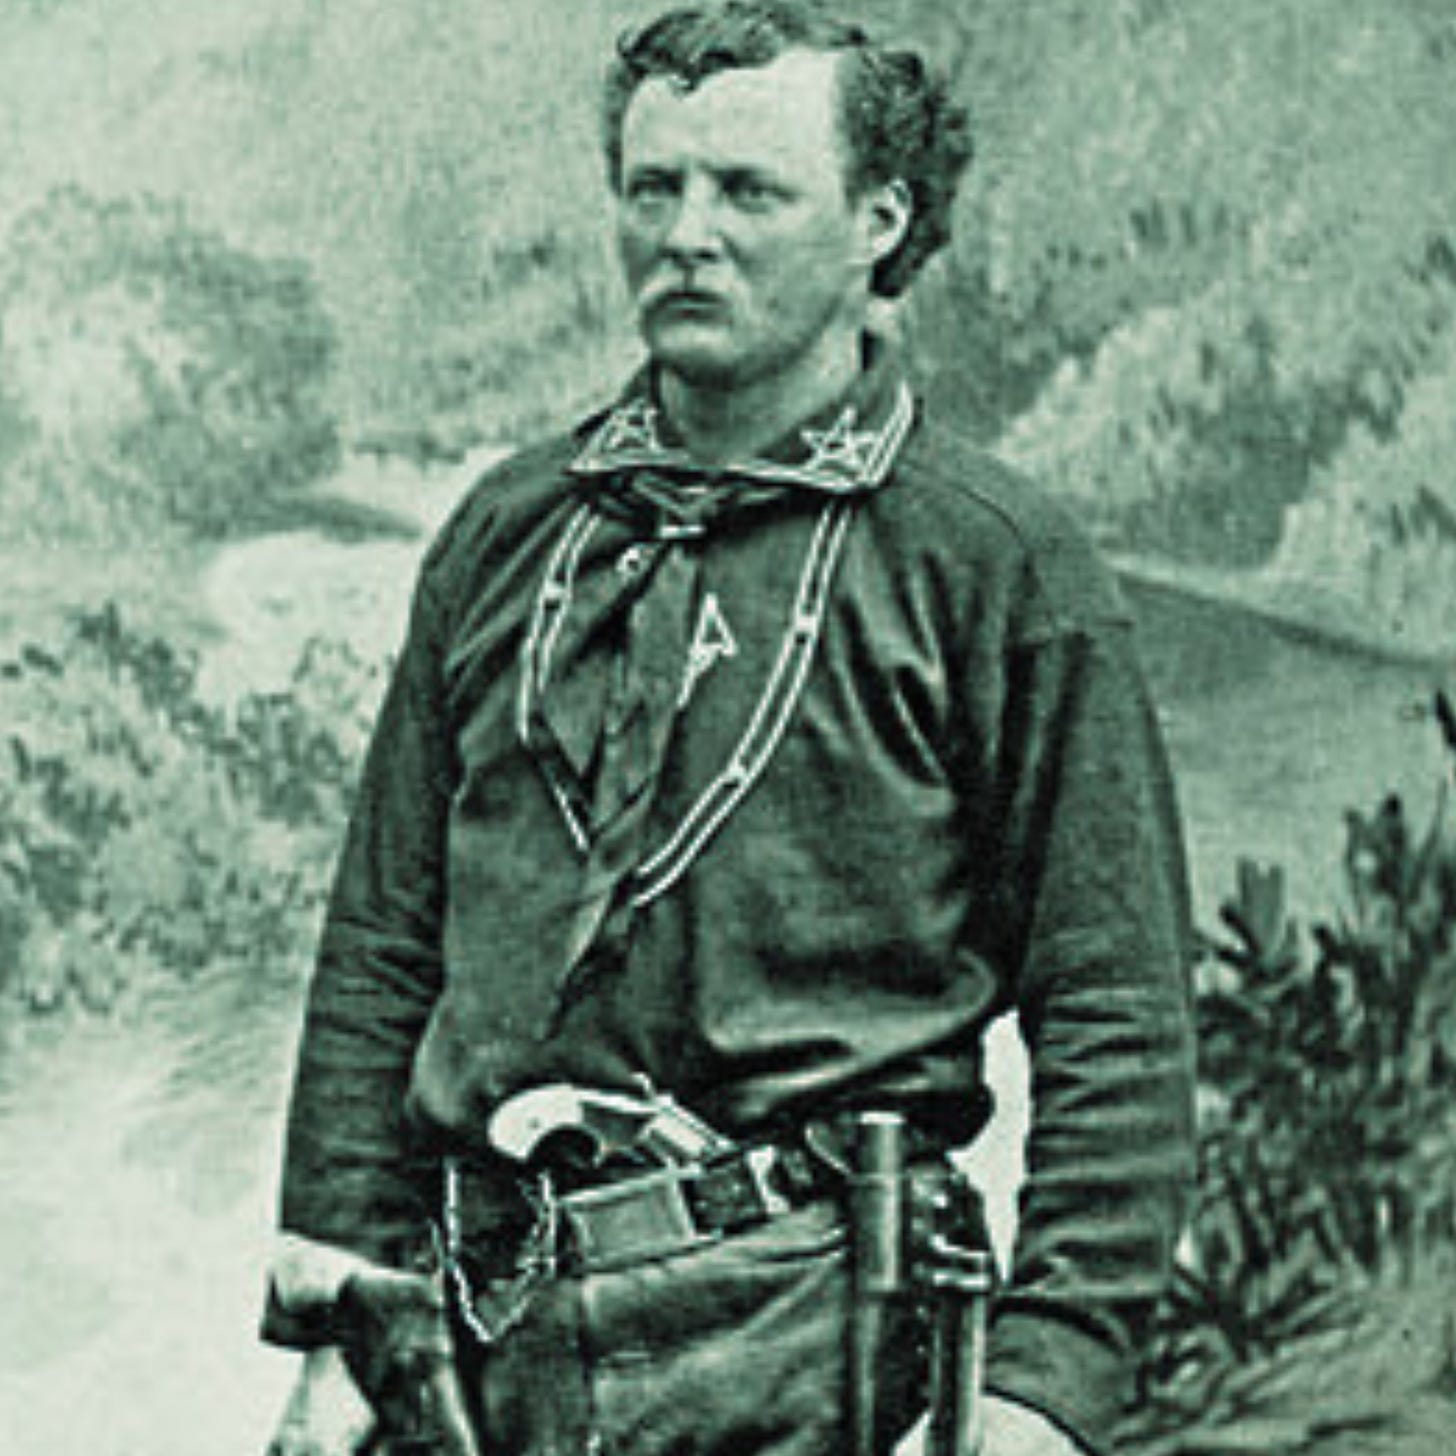 Photo of a heavily armed Jack Stilwell